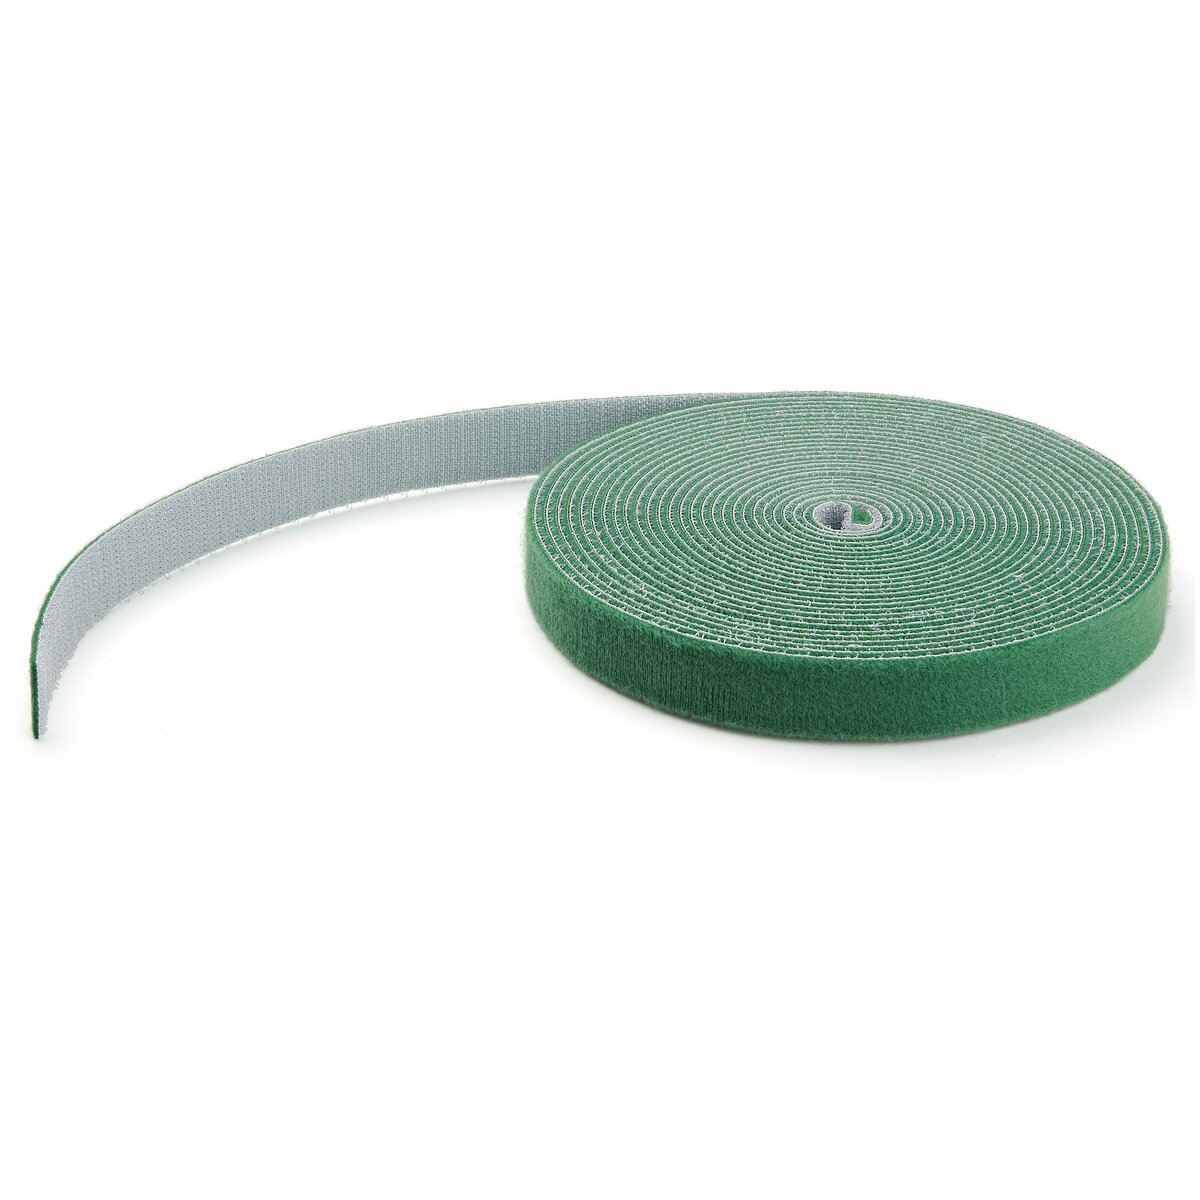 Double Side Hook and Loop Velcro Tape. Reusable Fastening Tape